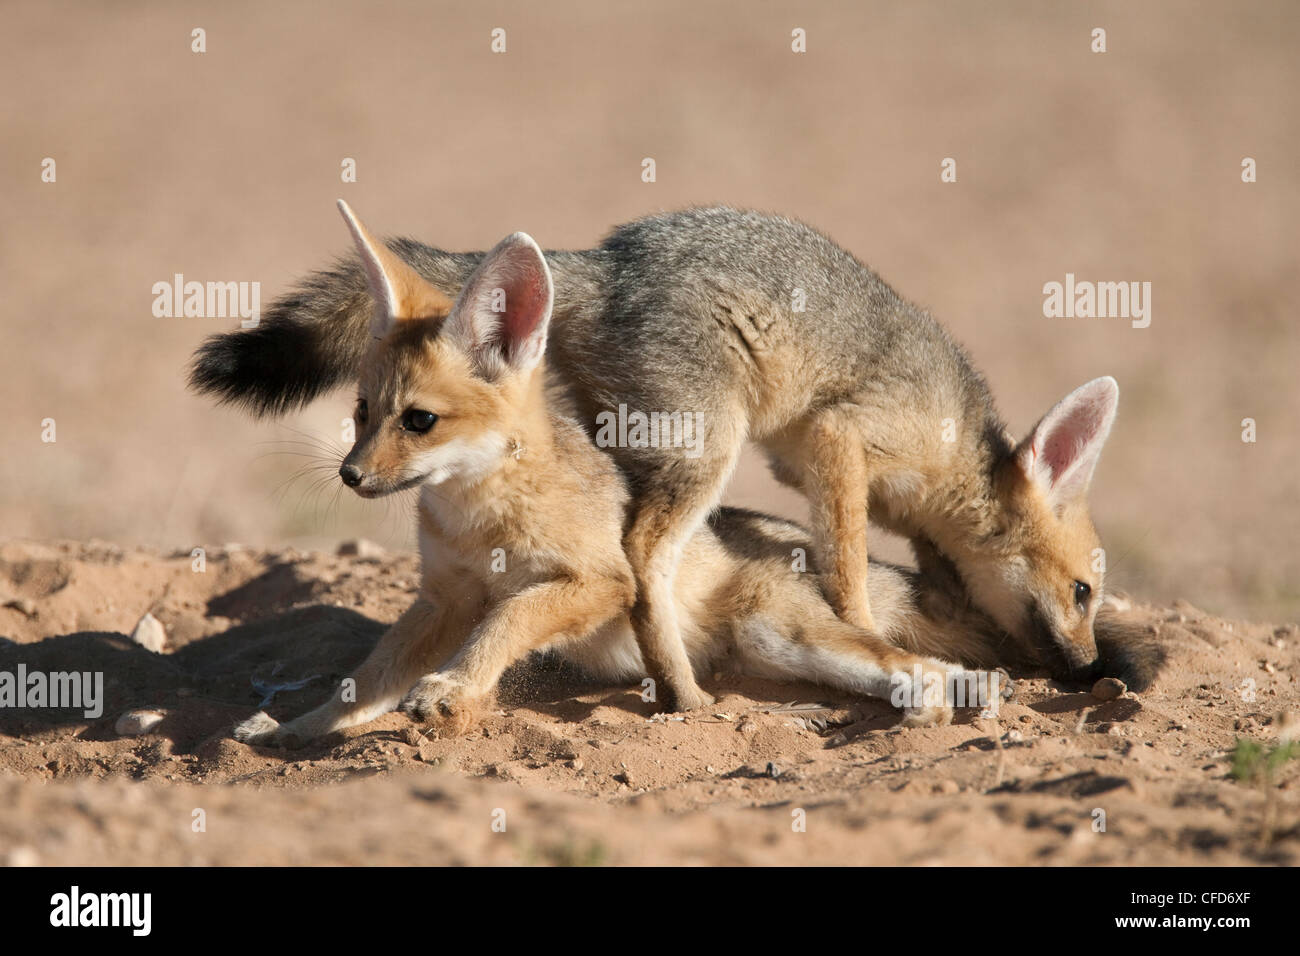 Capo volpe (Vulpes vulpes chama) cubs giocando, Kgalagadi Parco transfrontaliero, Northern Cape, Sud Africa e Africa Foto Stock